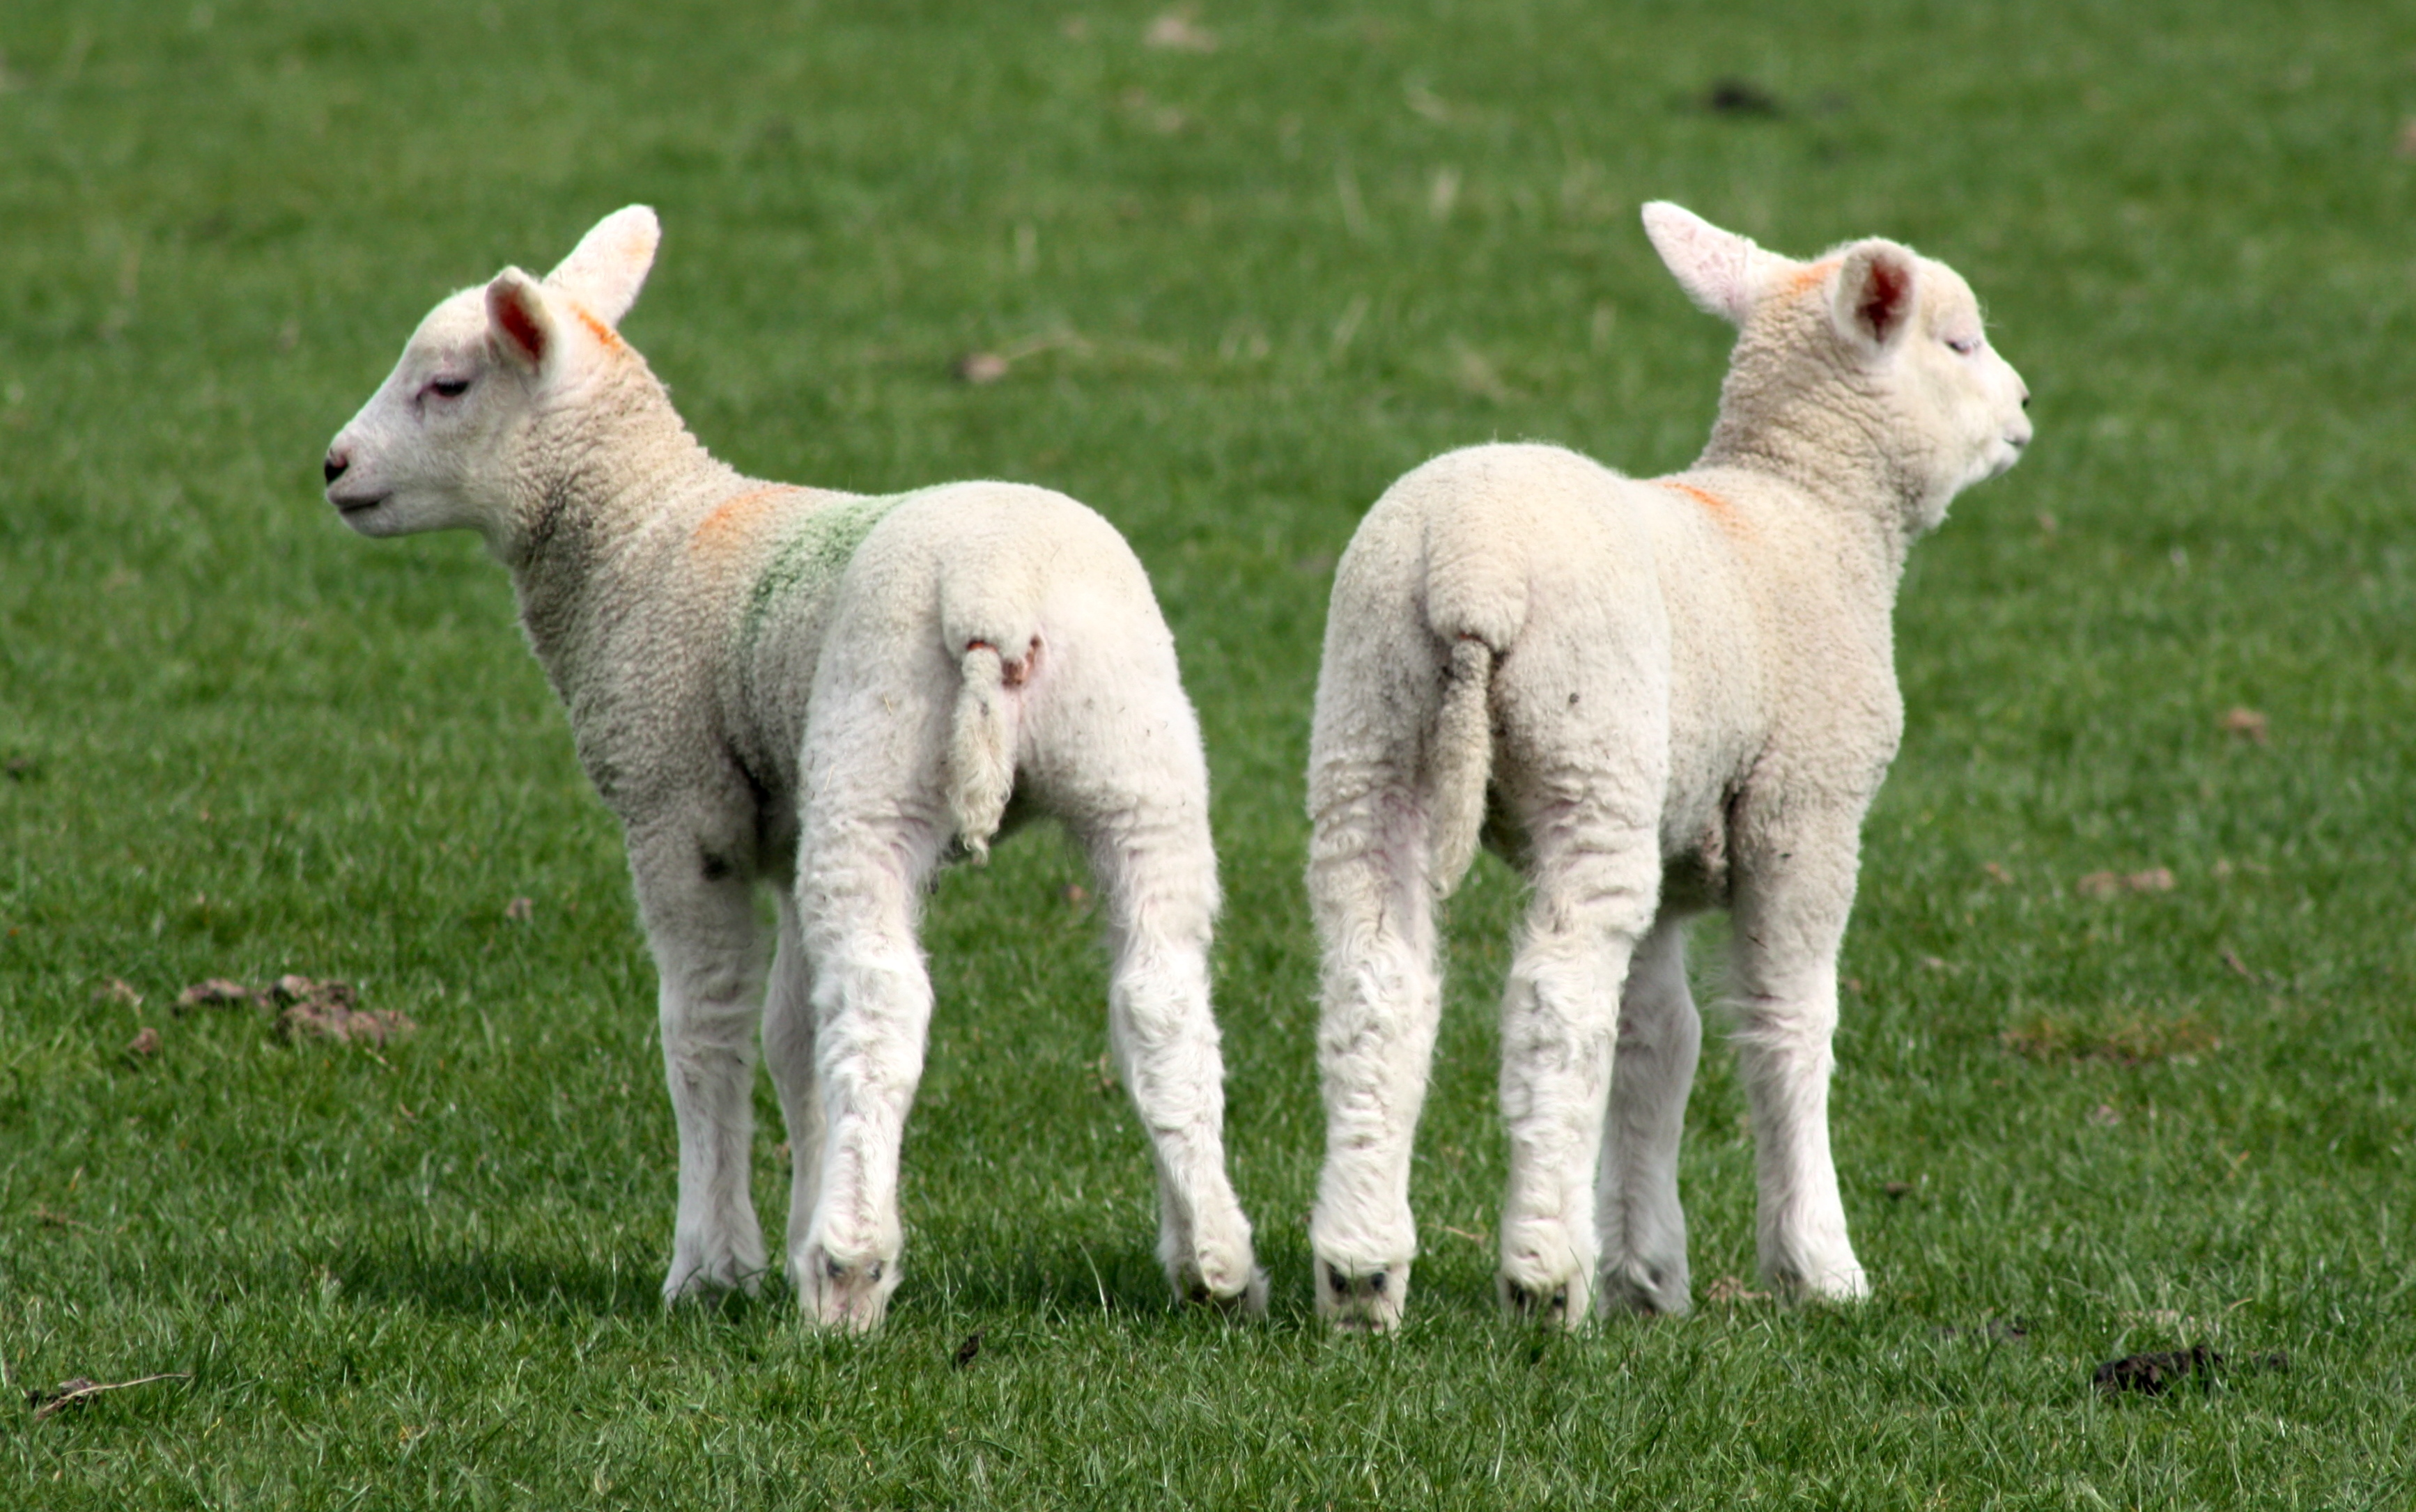 Two_lambs_rubber_ring_tail_docking,_cropped.jpg